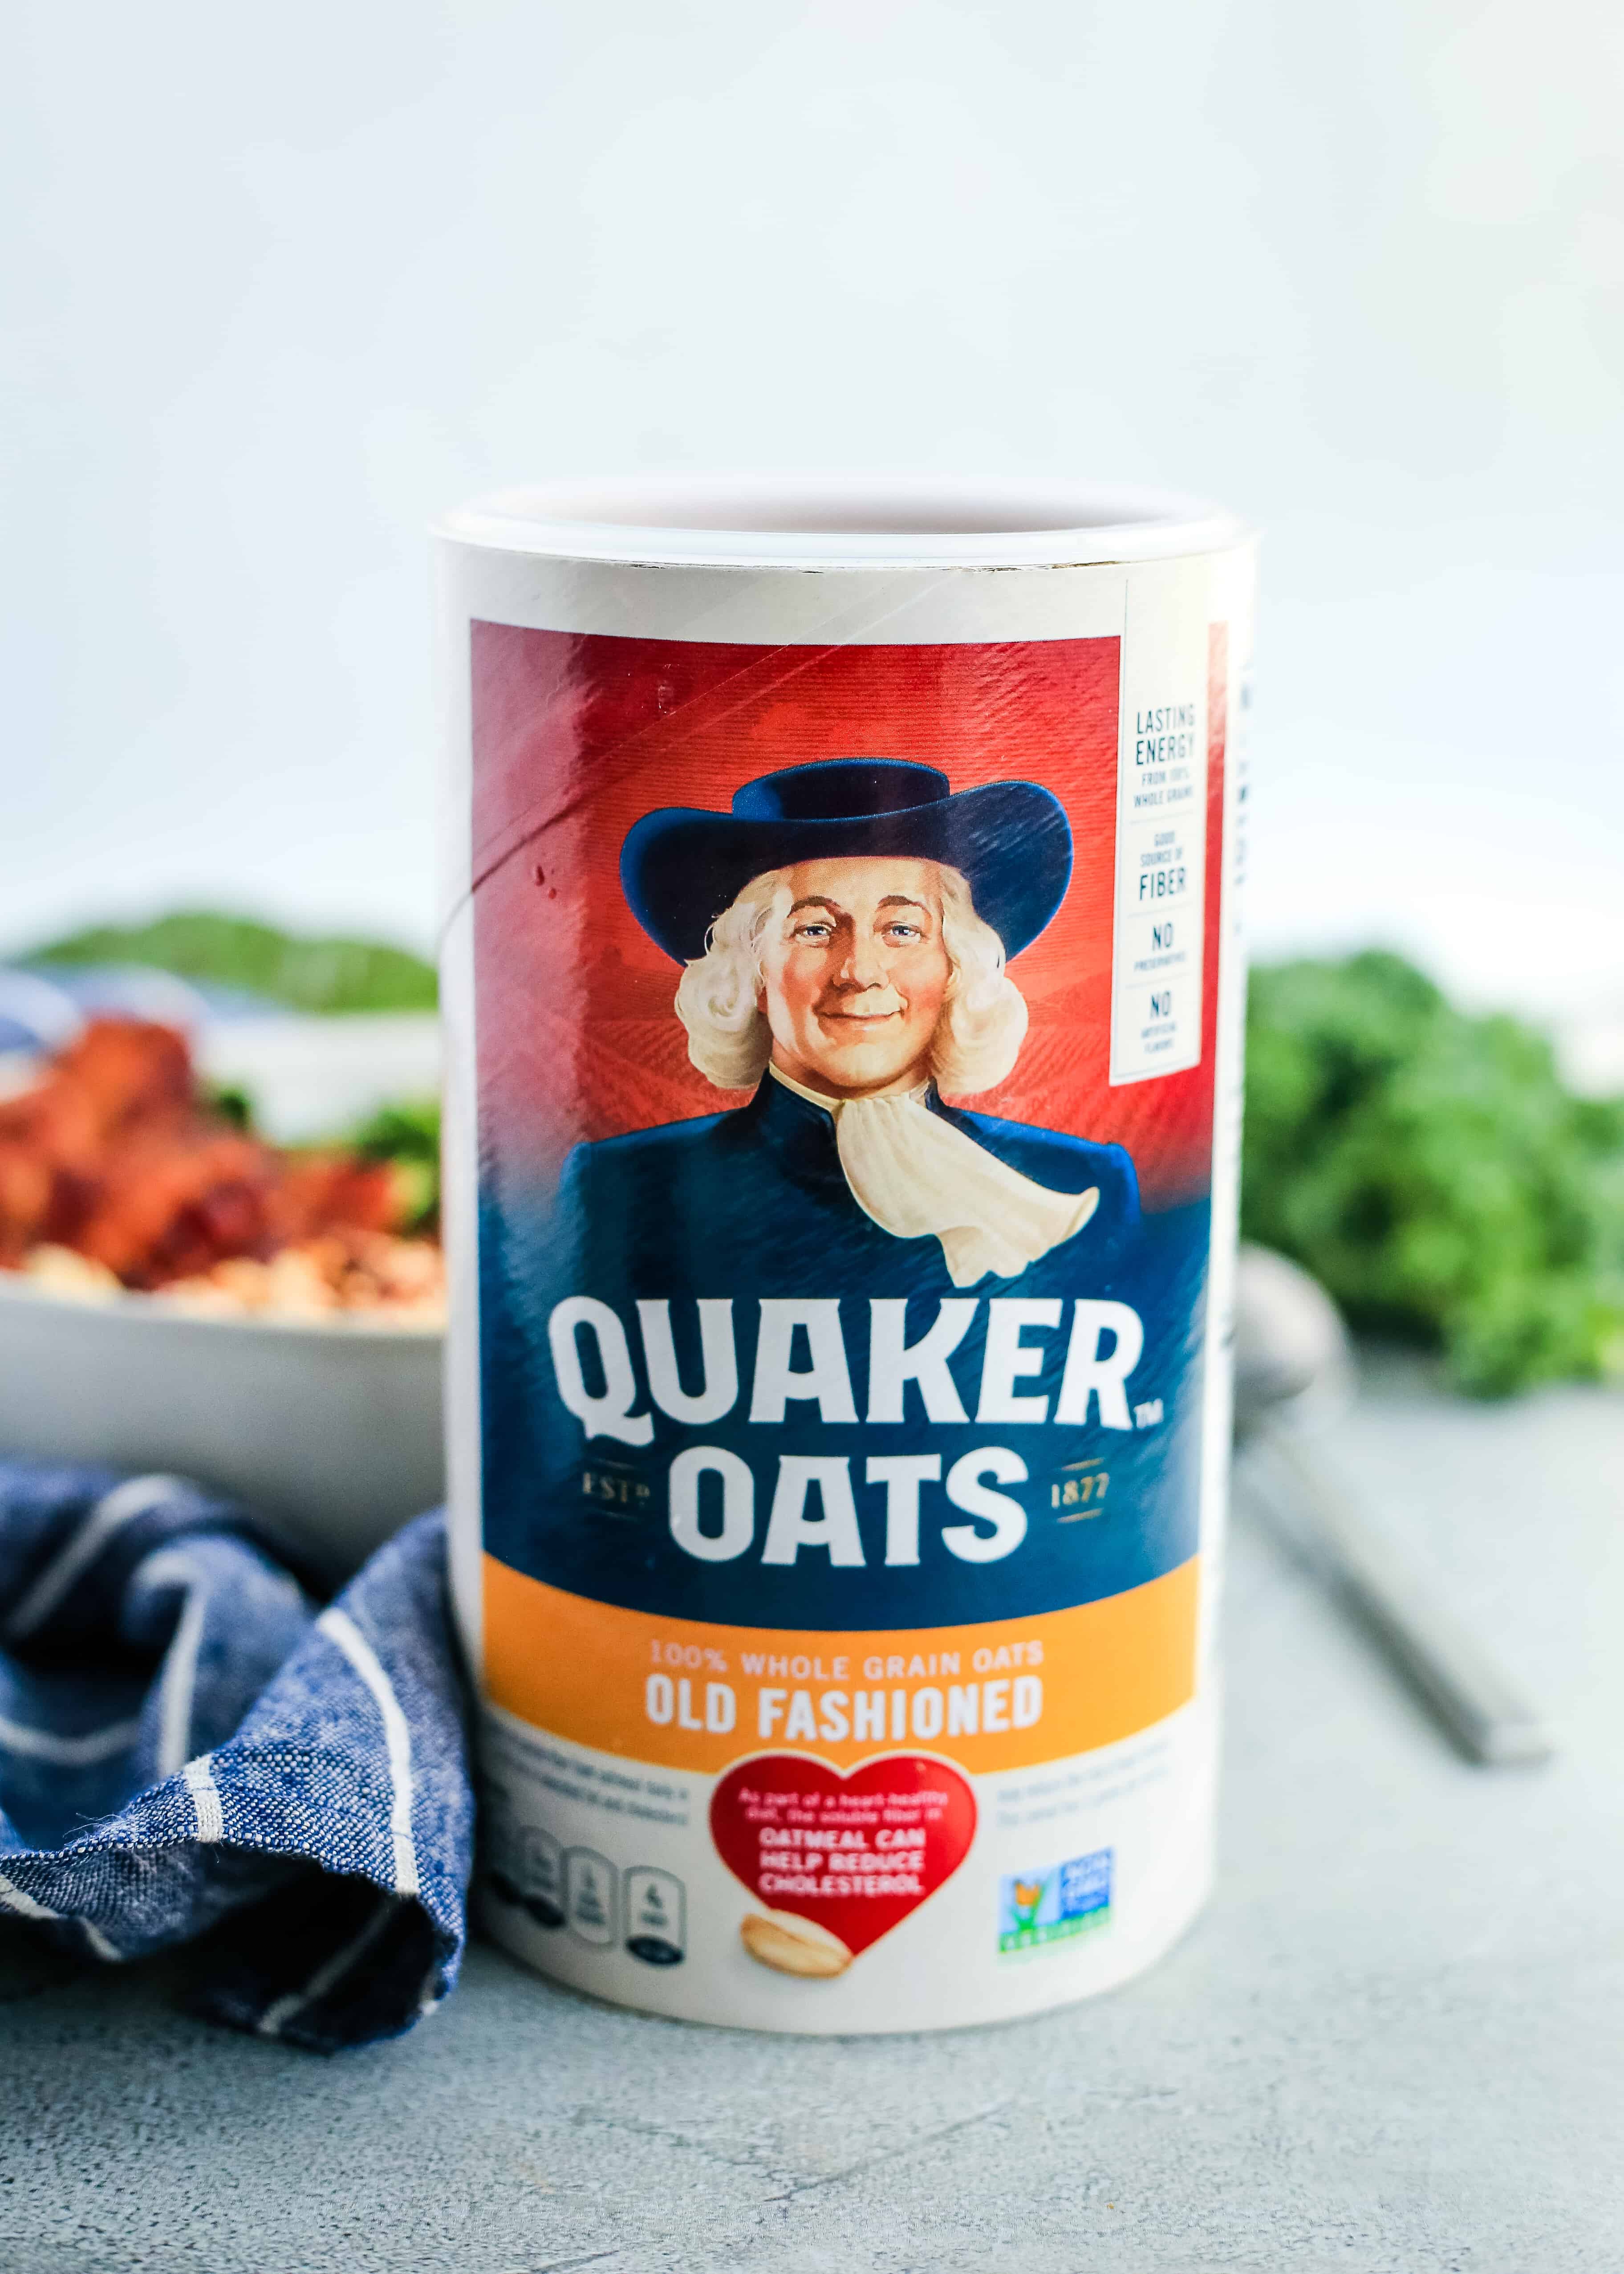 Savory oats are the breakfast trend you need to try! Learn more about this popular spin on the classic Quaker Old-Fashioned Oats, plus a new recipe for Savory Oats with Garlic Greens. 